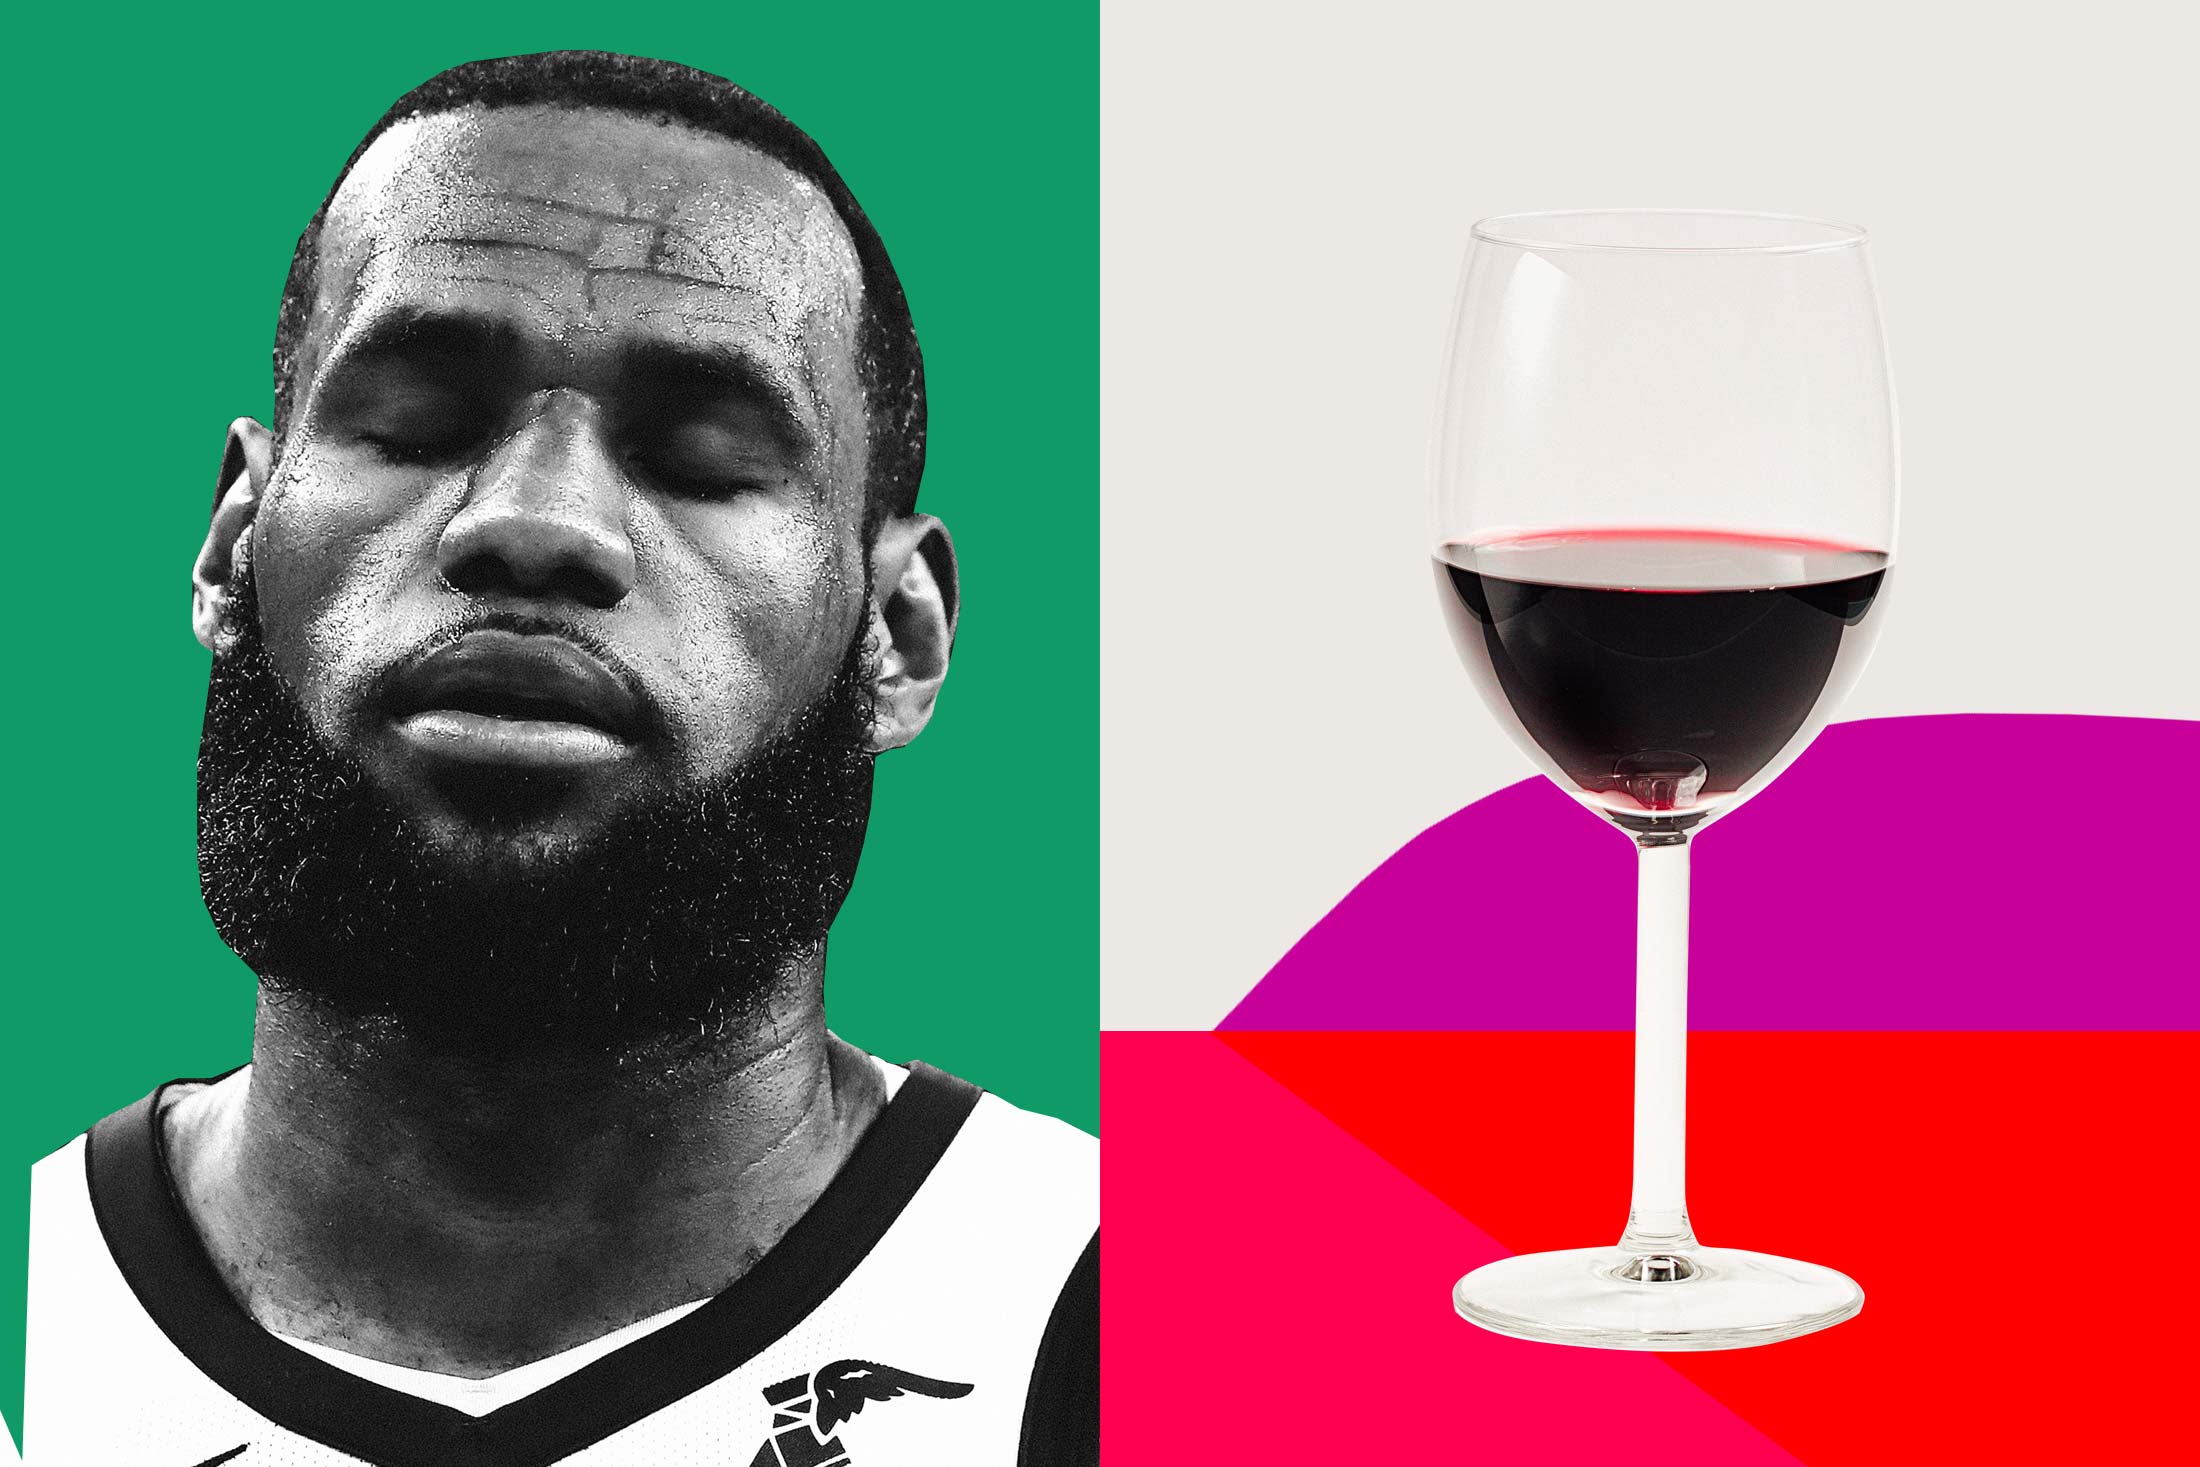 LeBron and a glass of wine.